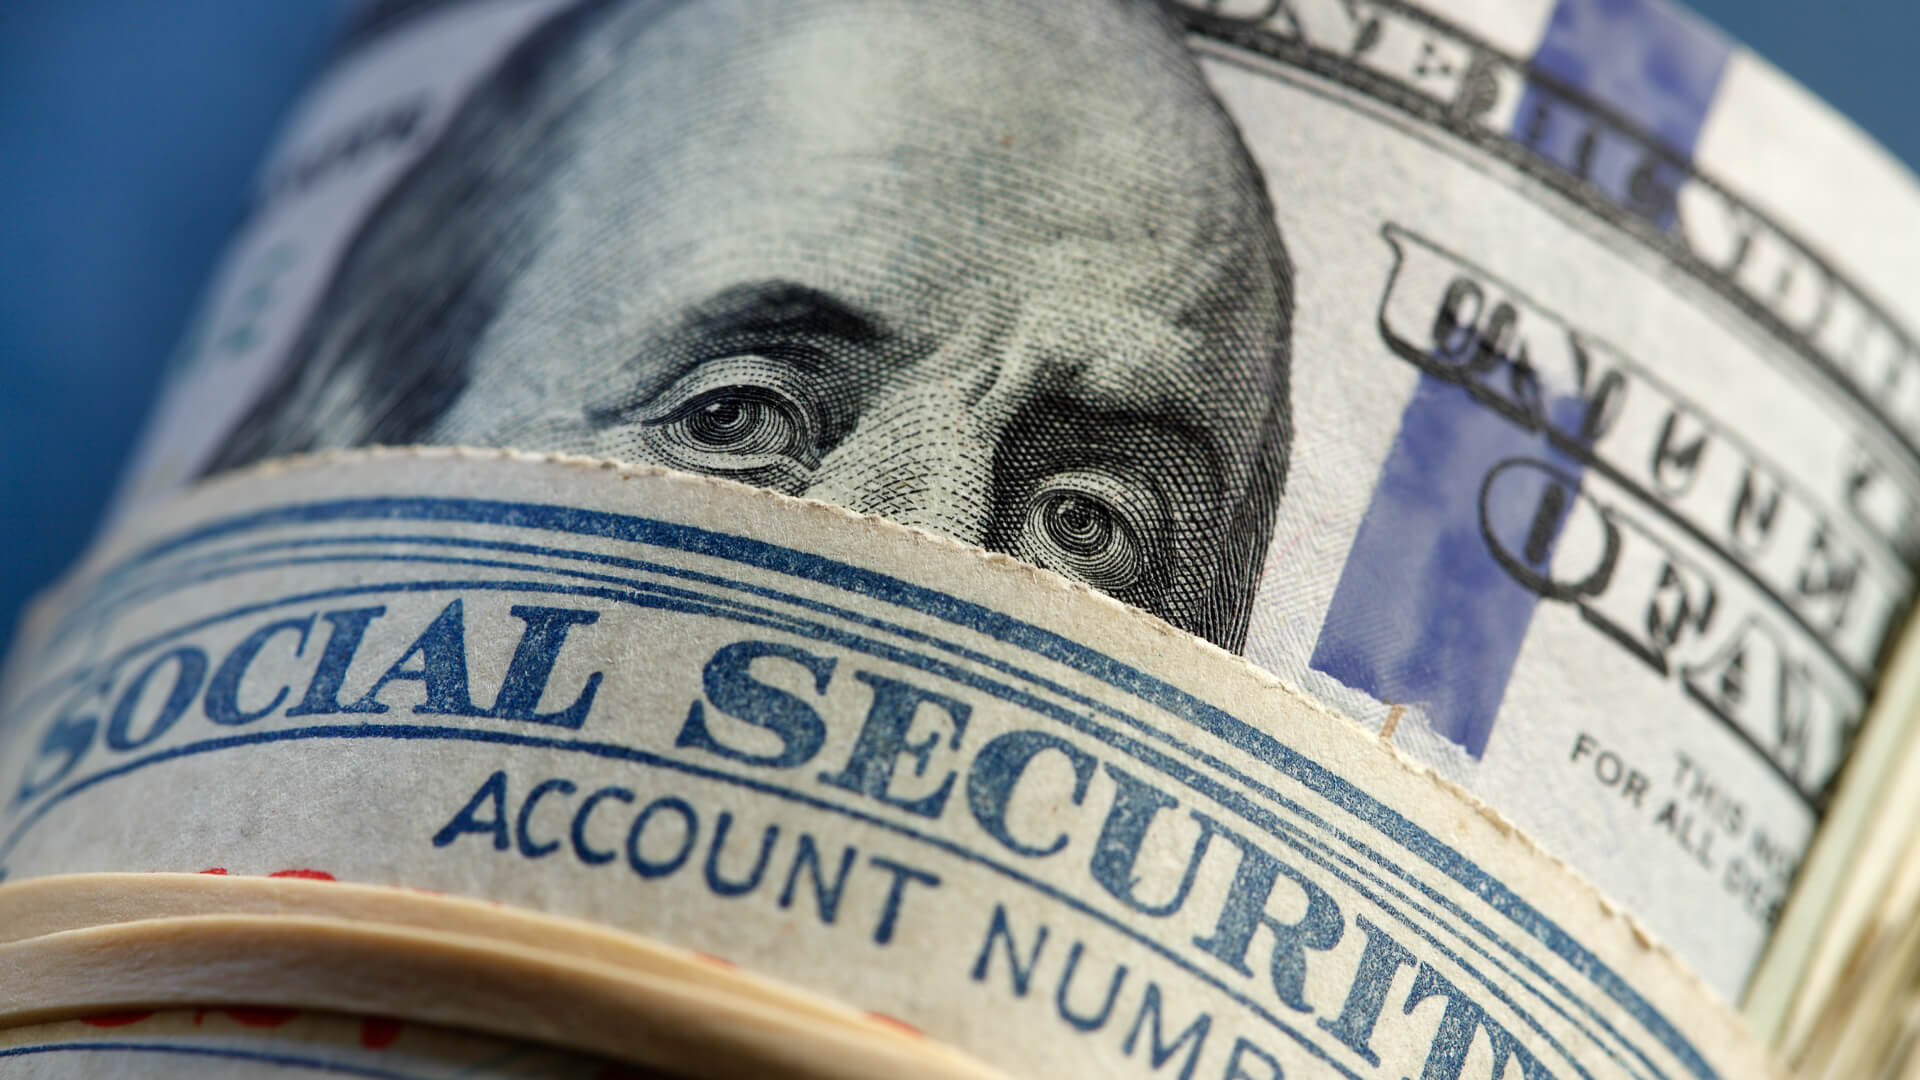 #Experts Propose Tax Cap as Social Security Solution — Which Americans Would Be Most Affected?